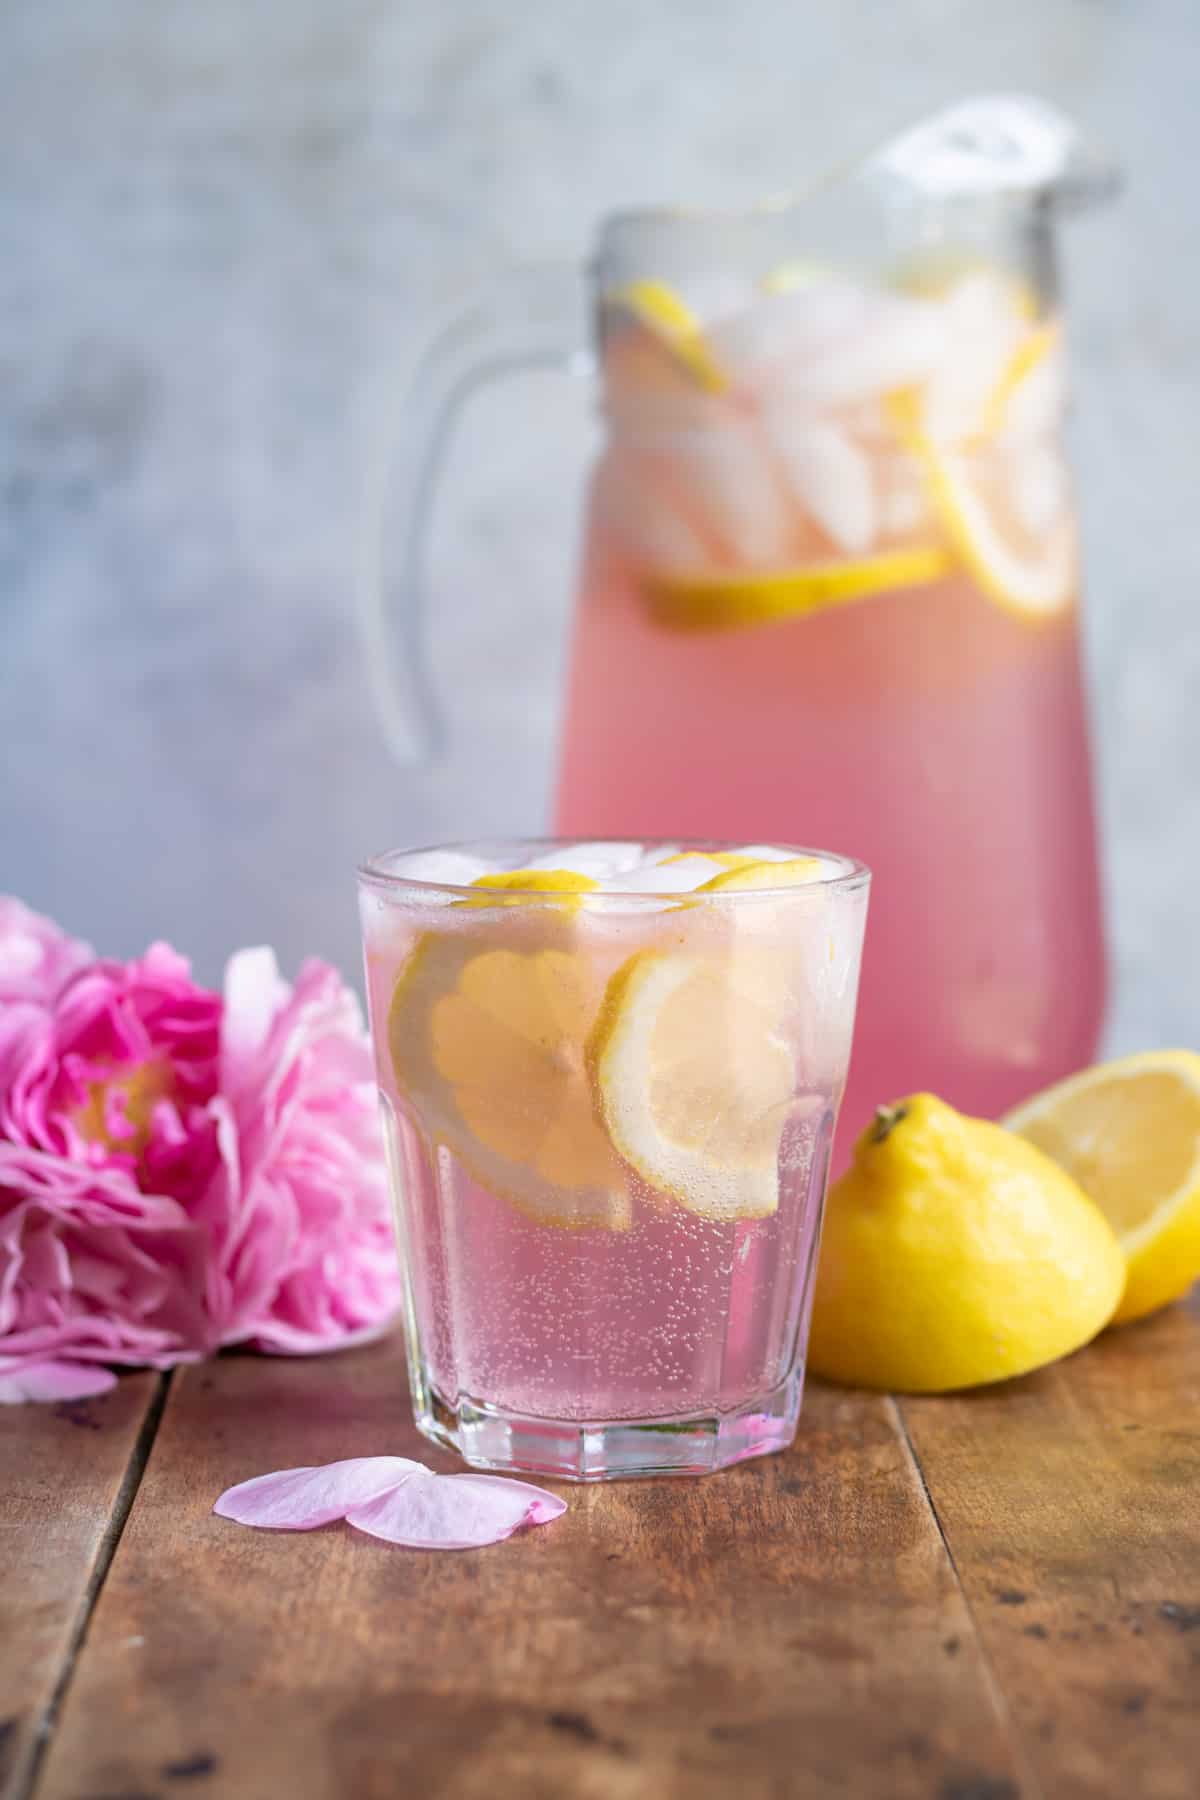 A glass of rose lemonade with ice and lemon slices.